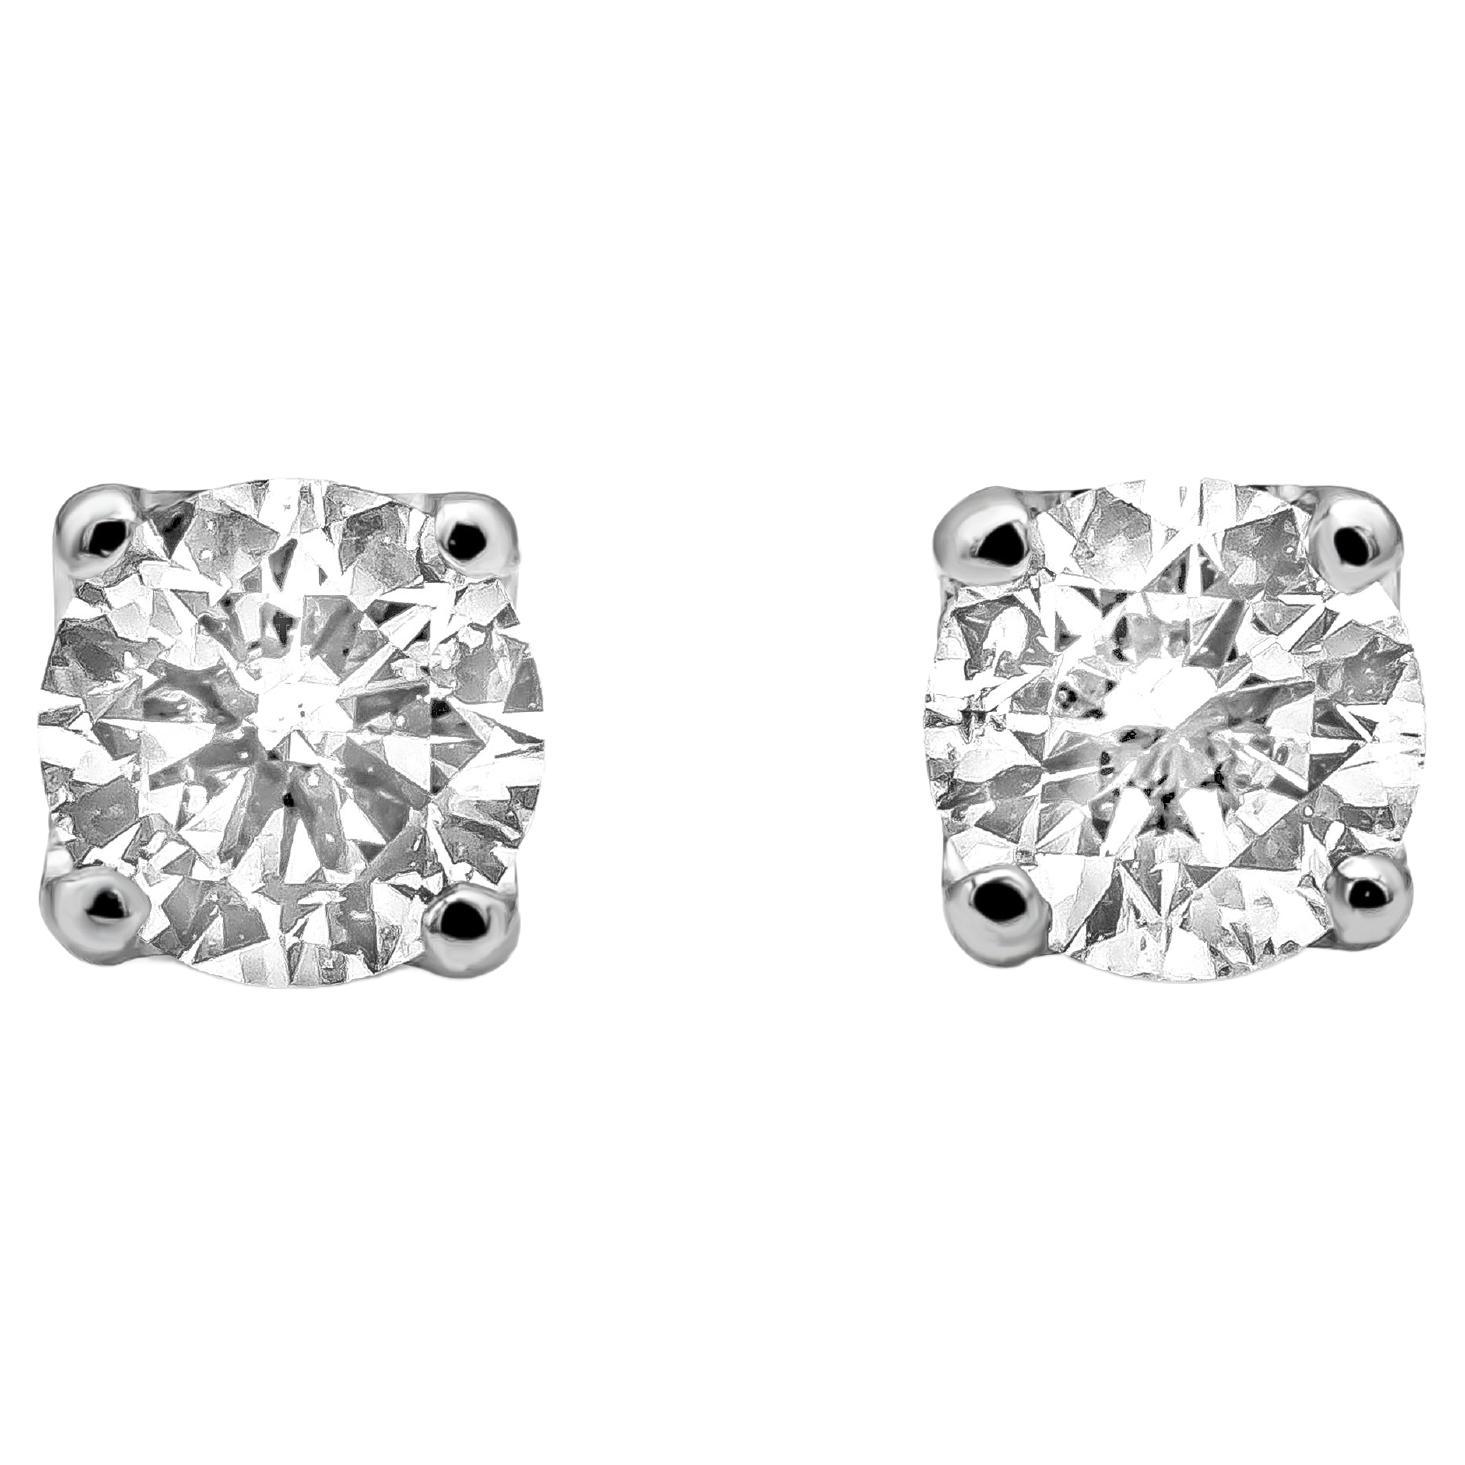 A timeless stud earring design to compliment any style. Showcasing 2 round brilliant diamonds weighing 0.80 carats, F-G Color and SI in Clarity. Set in a traditional four prong setting and finely made in Platinum.

Roman Malakov is a custom house,